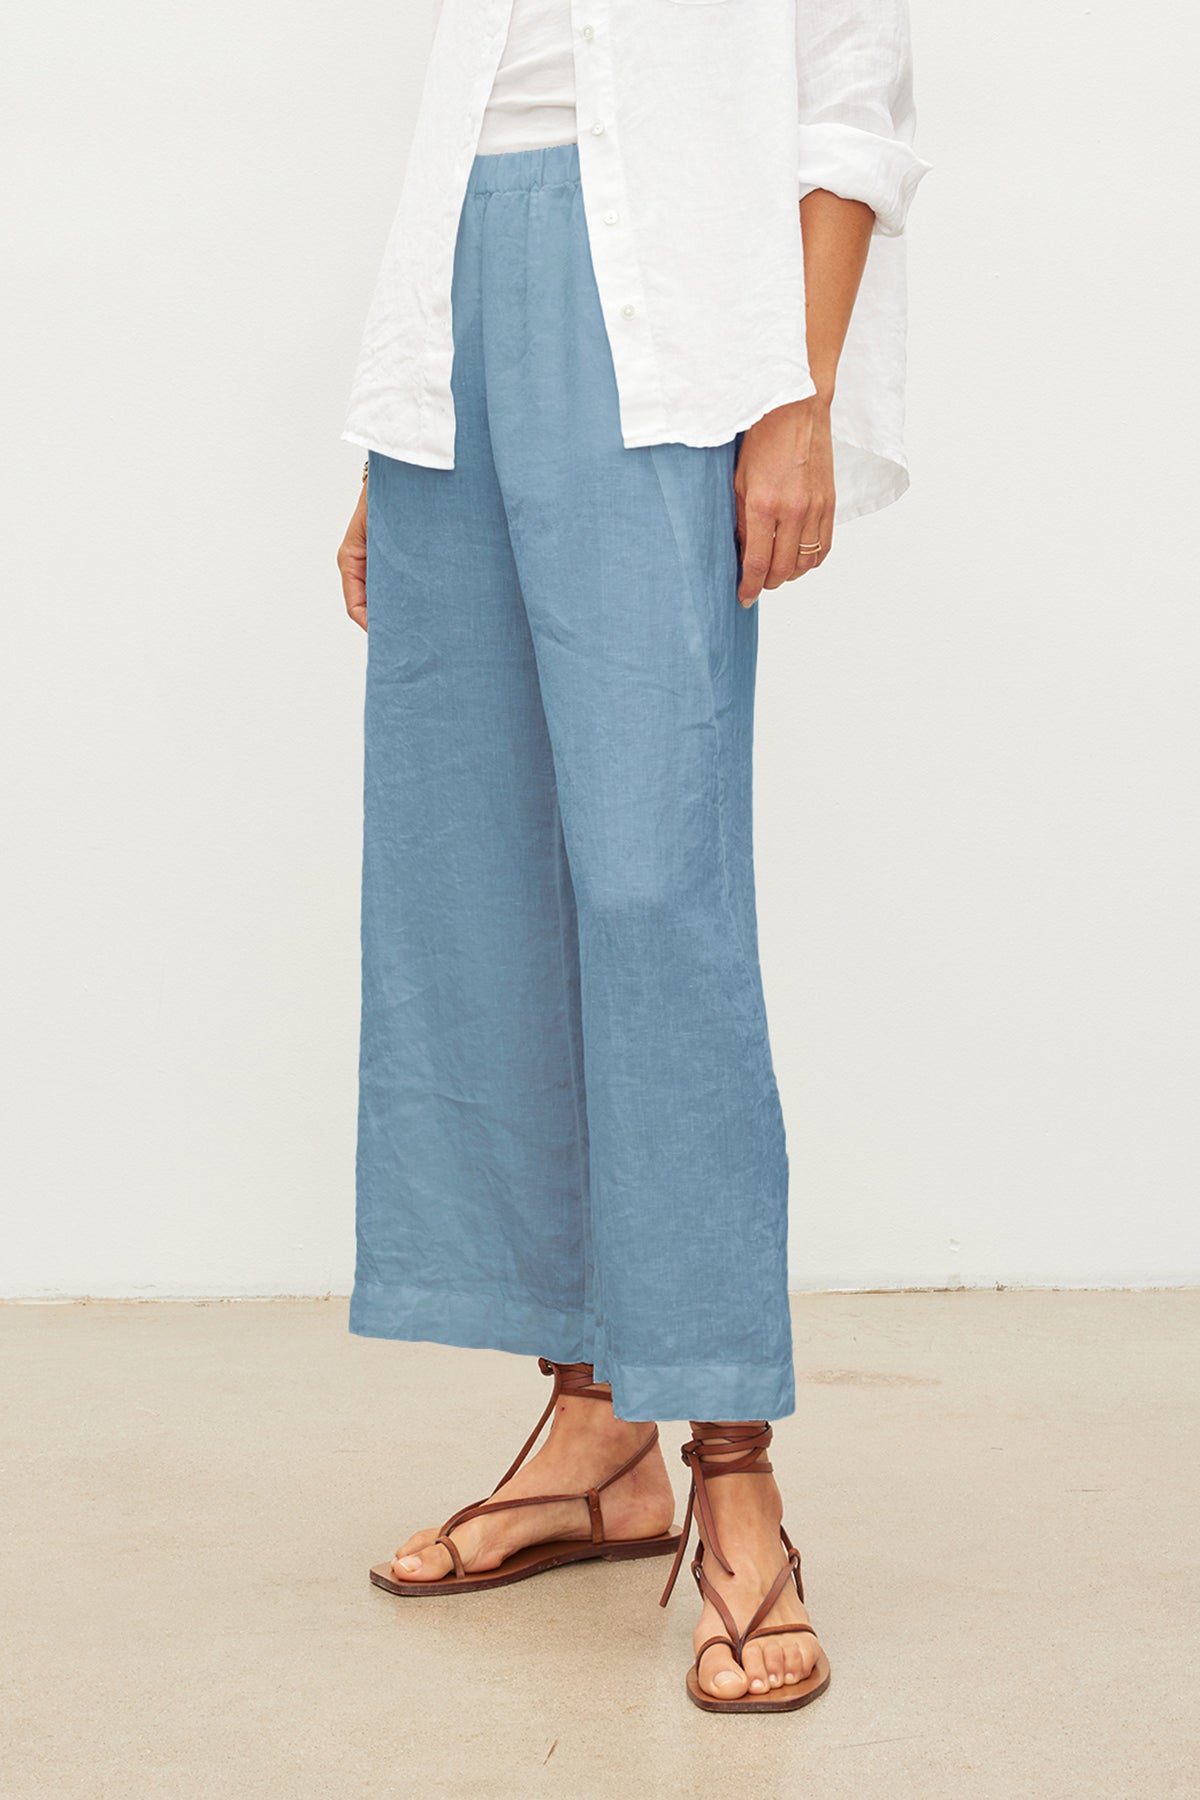 A person is wearing light blue LOLA LINEN PANT by Velvet by Graham & Spencer, a white shirt, and brown sandals against a plain background.-36161404928193